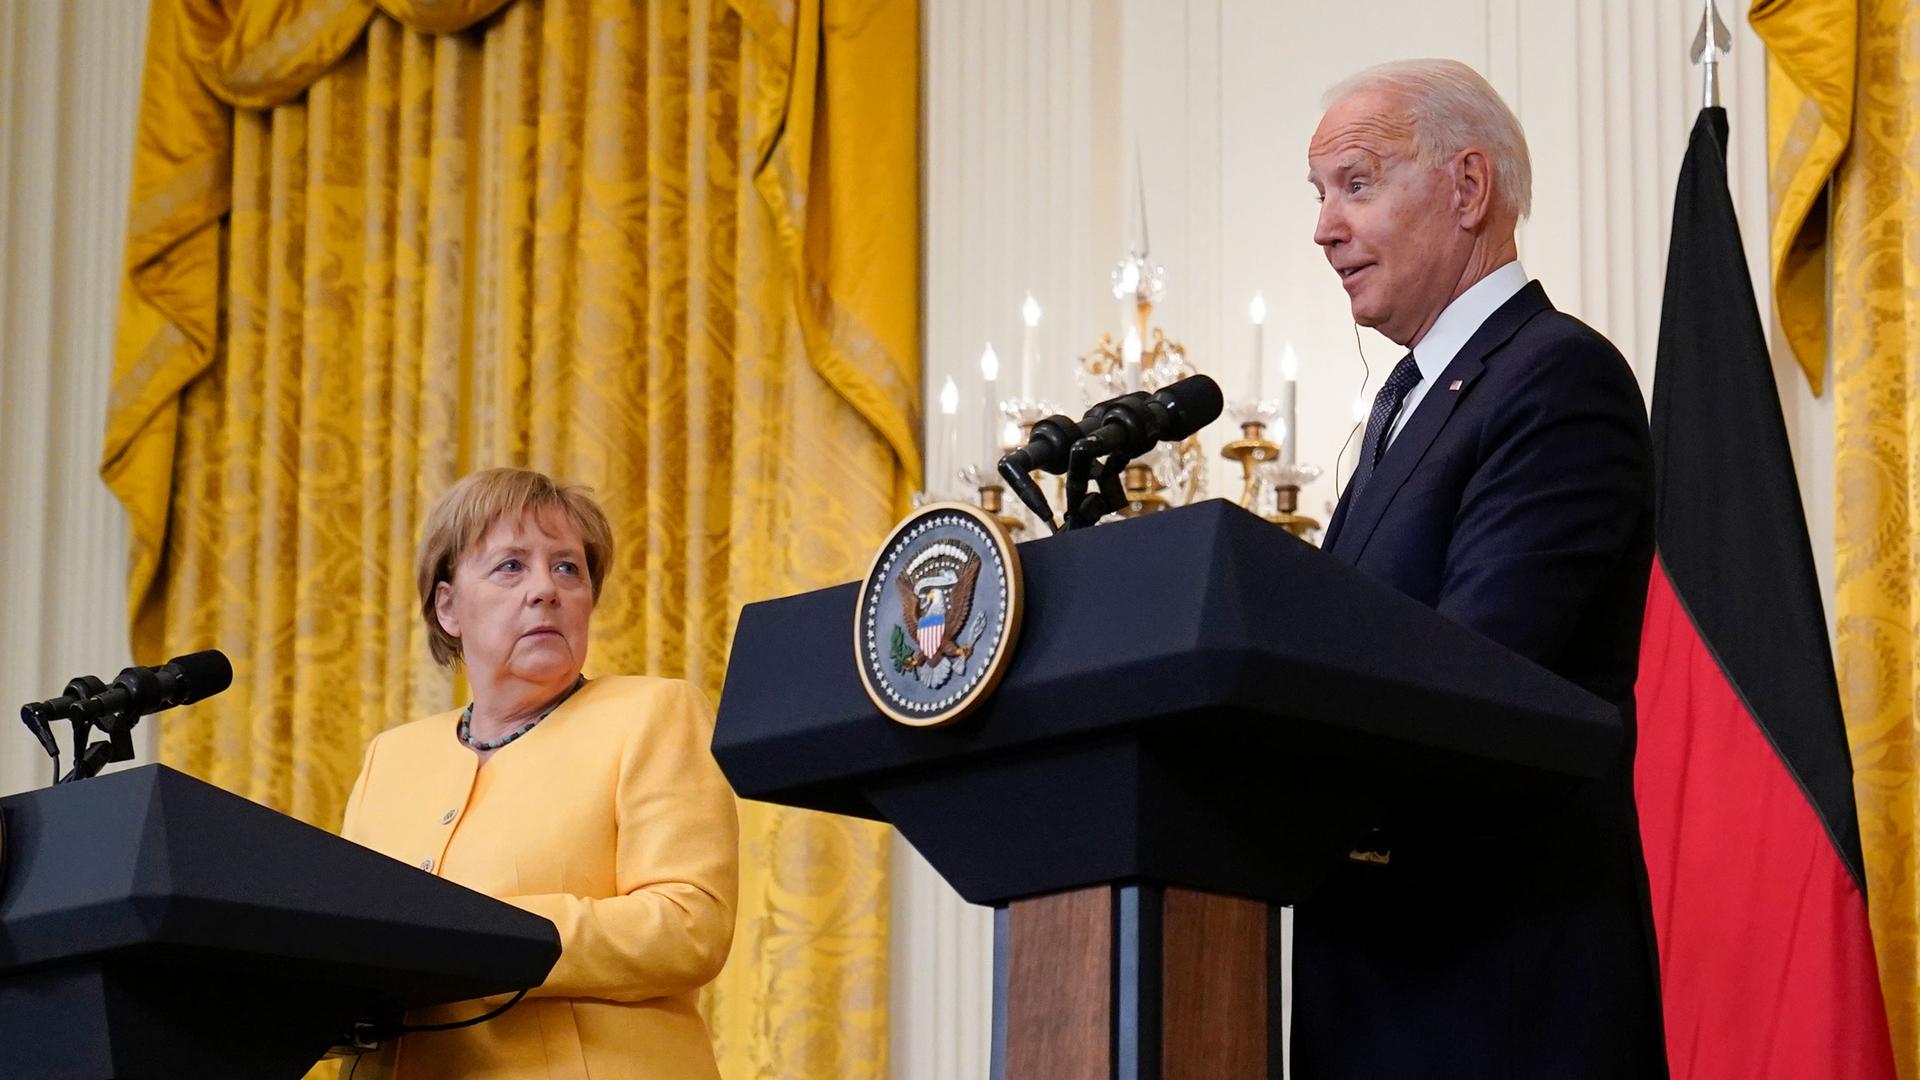 President Joe Biden and German Chancellor Angela Merkel are shown each standing behind podiums with several microphones on each stand.